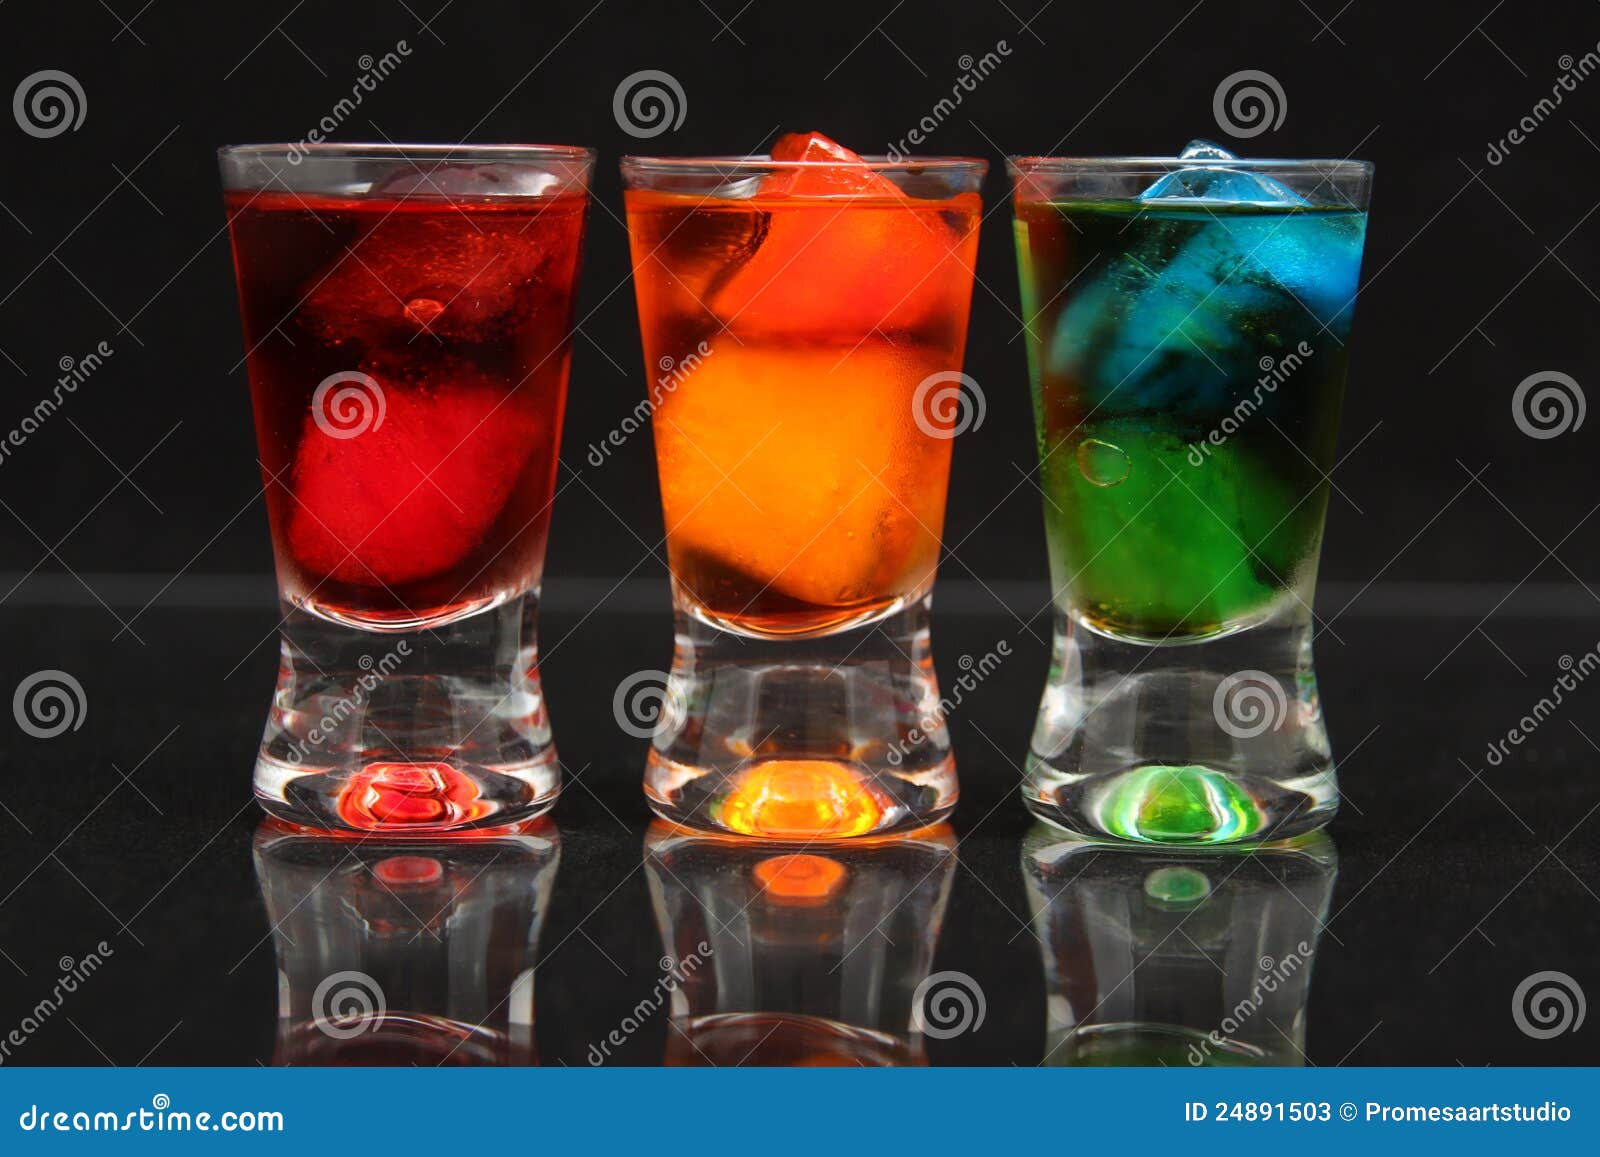 red, orange and green shots